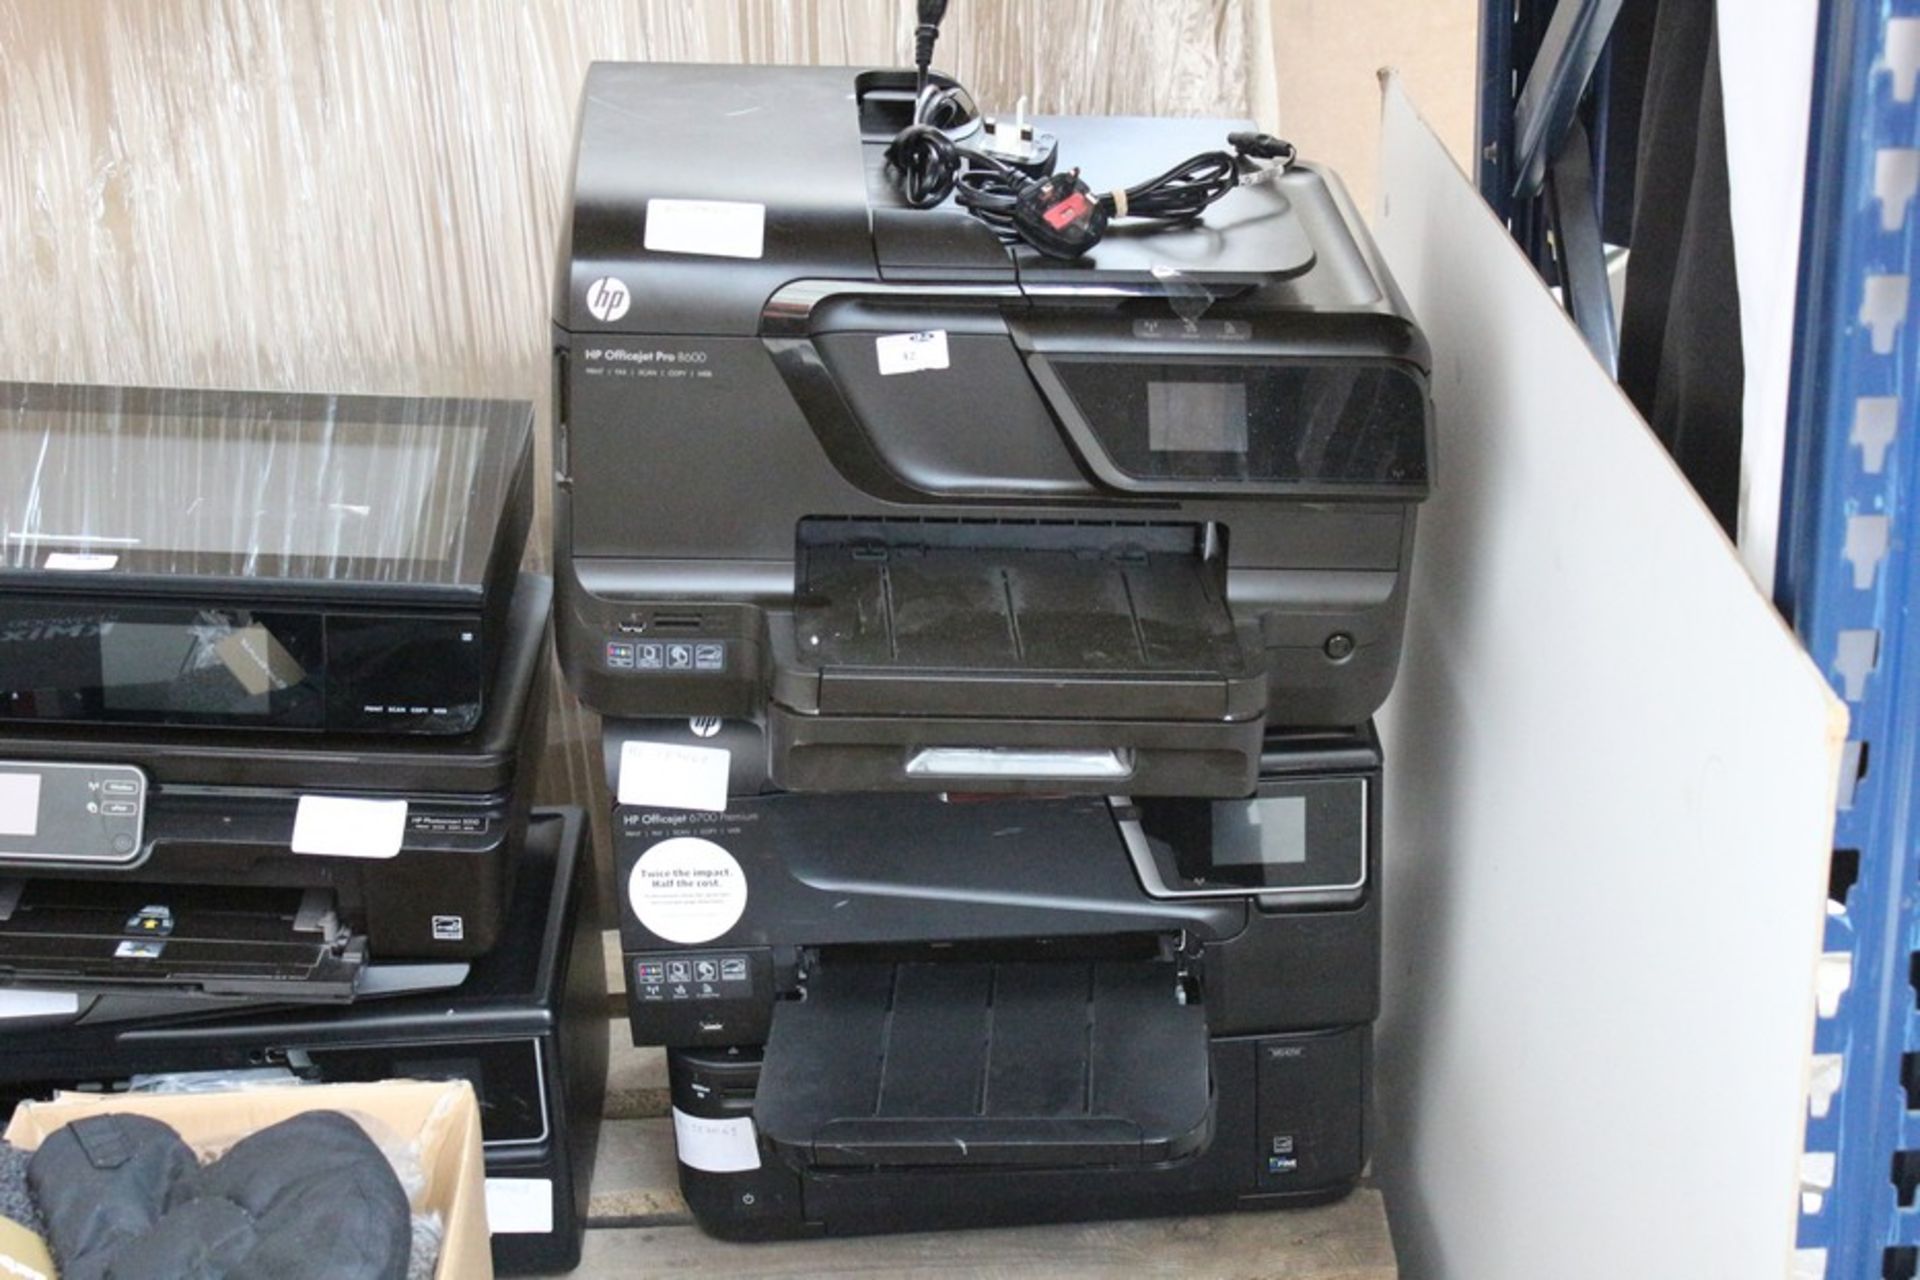 2 x ASSORTED PRINTERS TO INCLUDE HP OFFICE JET PROS AND OTHER (587069)  *PLEASE NOTE THAT THE BID